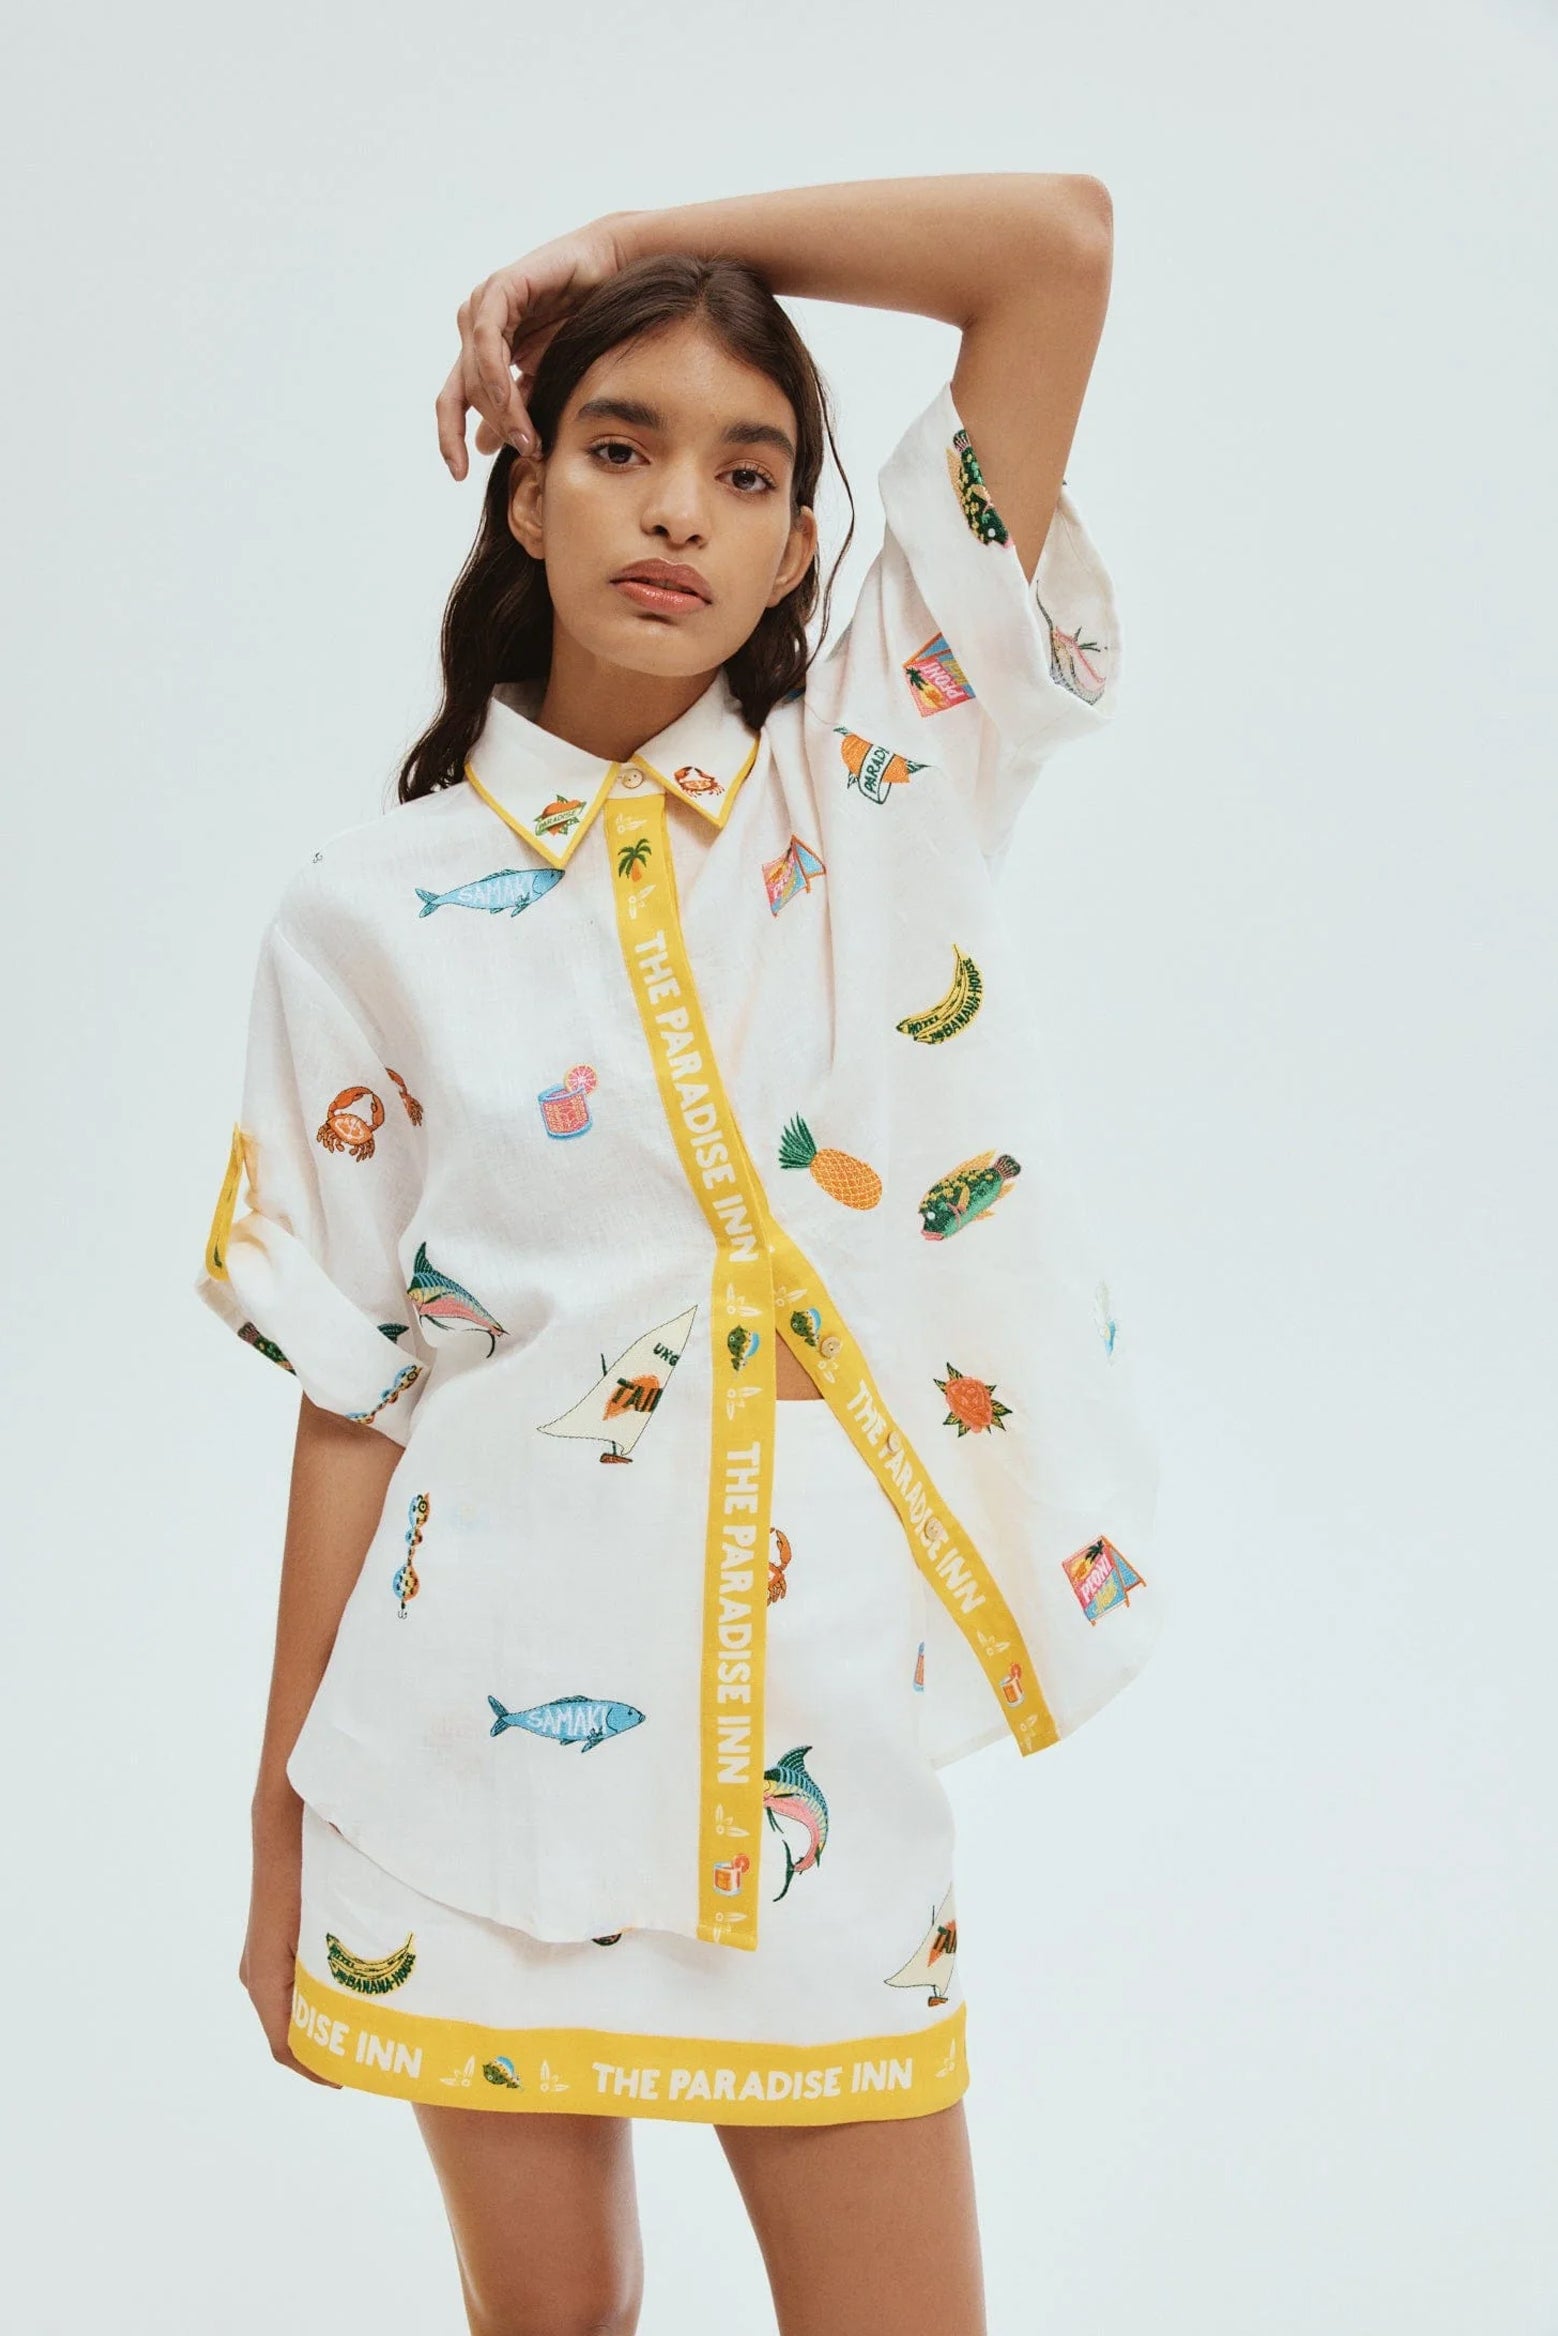 Alemais Blue Marlin Embroidered Shirt in Cream available at The New Trend